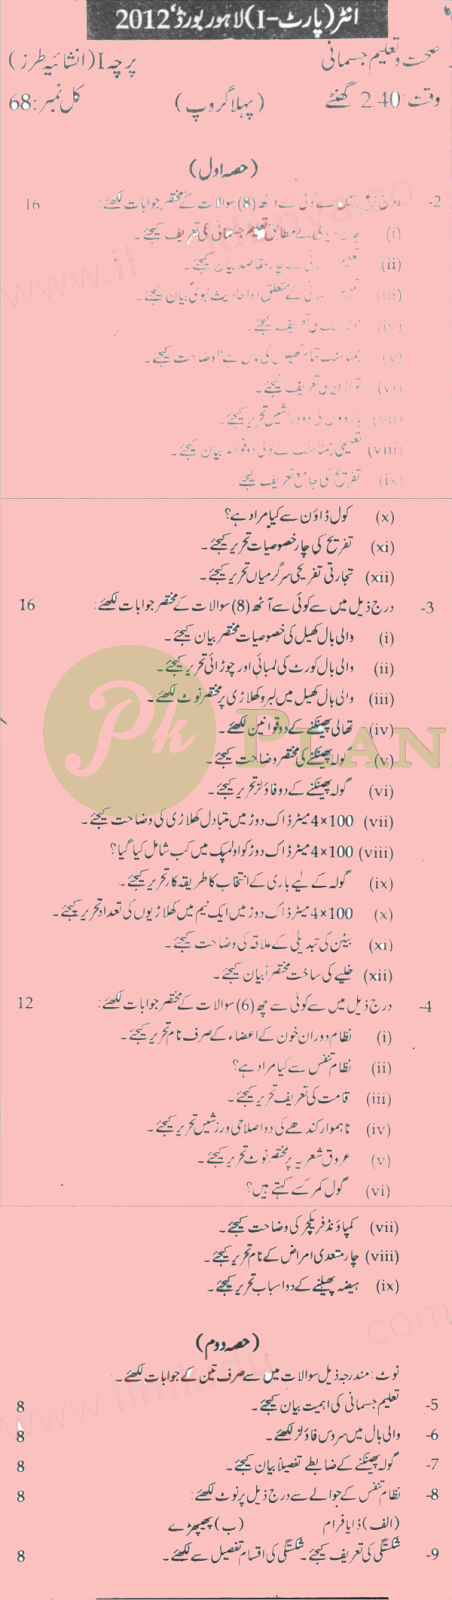 Intermediate Part 1 Past Papers Lahore Board Health Education 2012